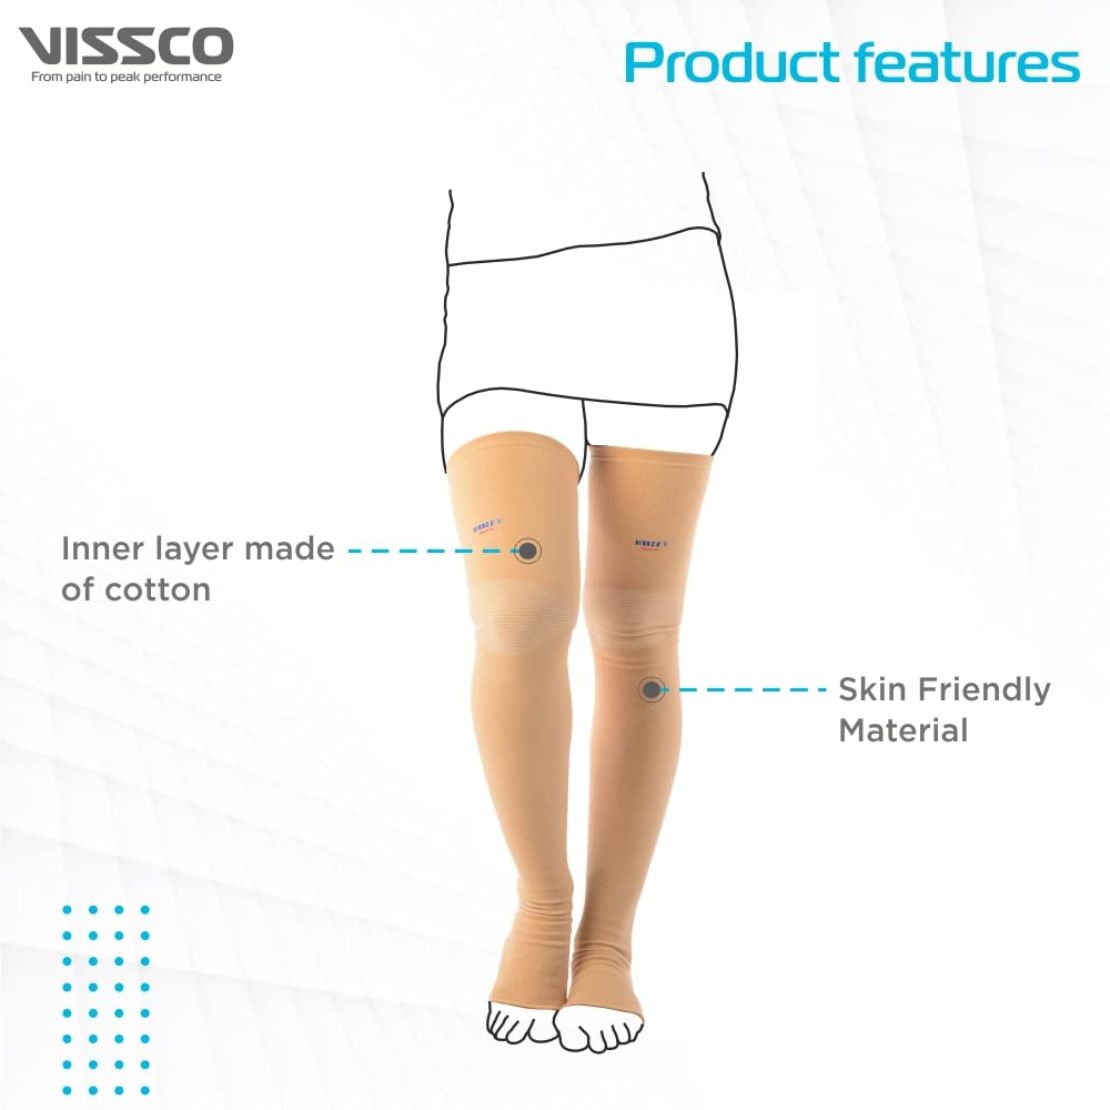 Buy Vissco Medical Compression Stockings (Above Knee) for best price in  India